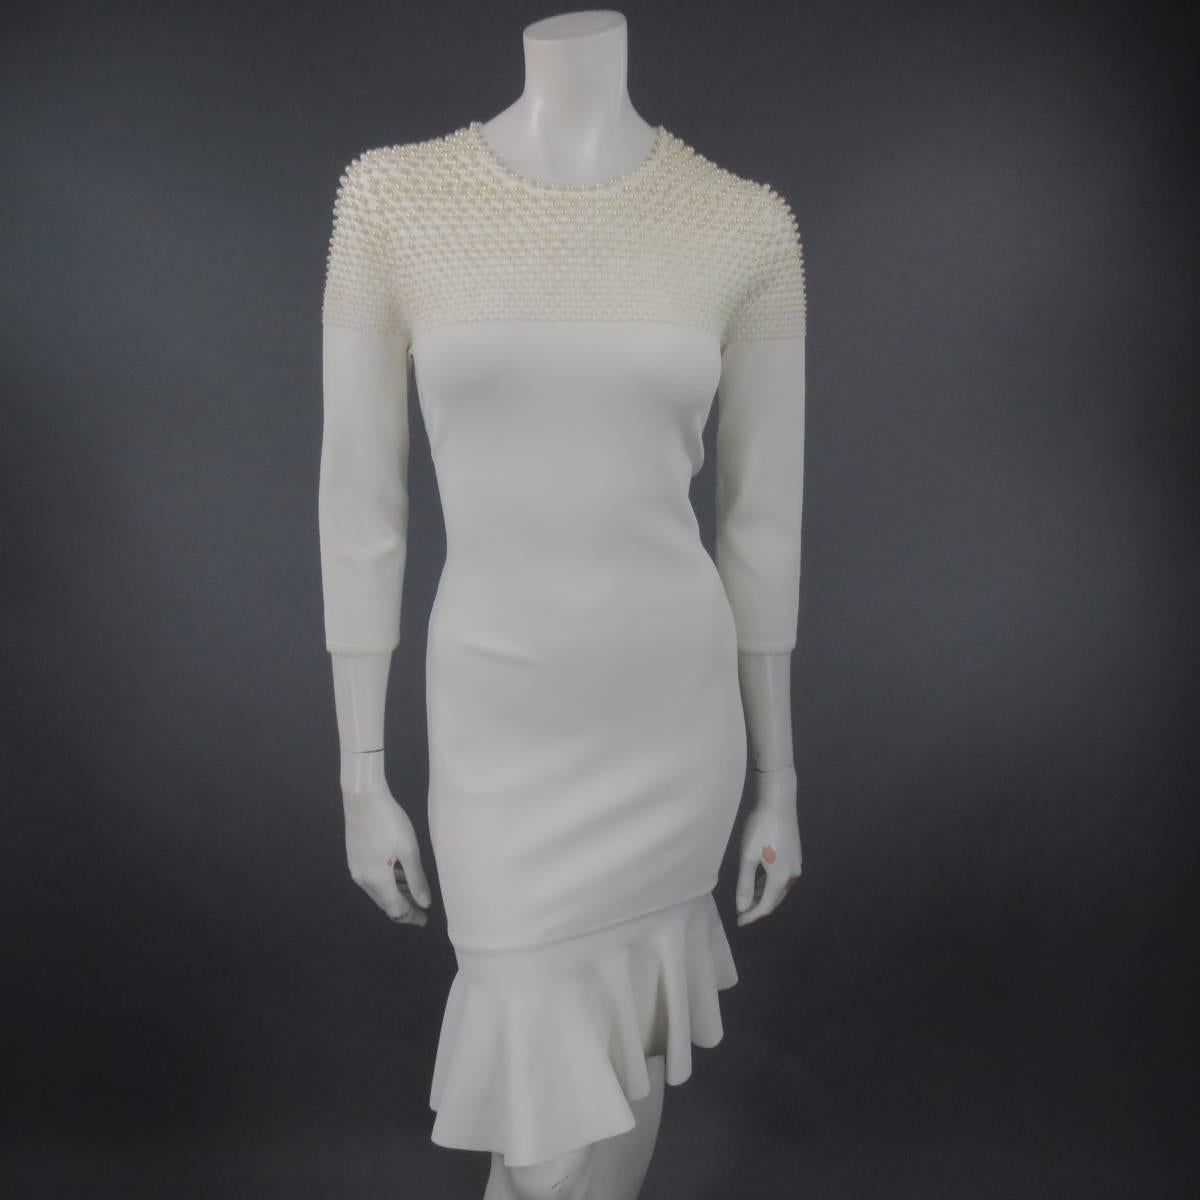 Gorgeous bodycon dress by ALEXANDER MCQUEEN. A fitted 3/4 sleeve crew neck style in cream stretch knit, embellished with faux pearls that cascade from large to small along the top and finished with a ruffle hem on the skirt. Elegant enough to dress